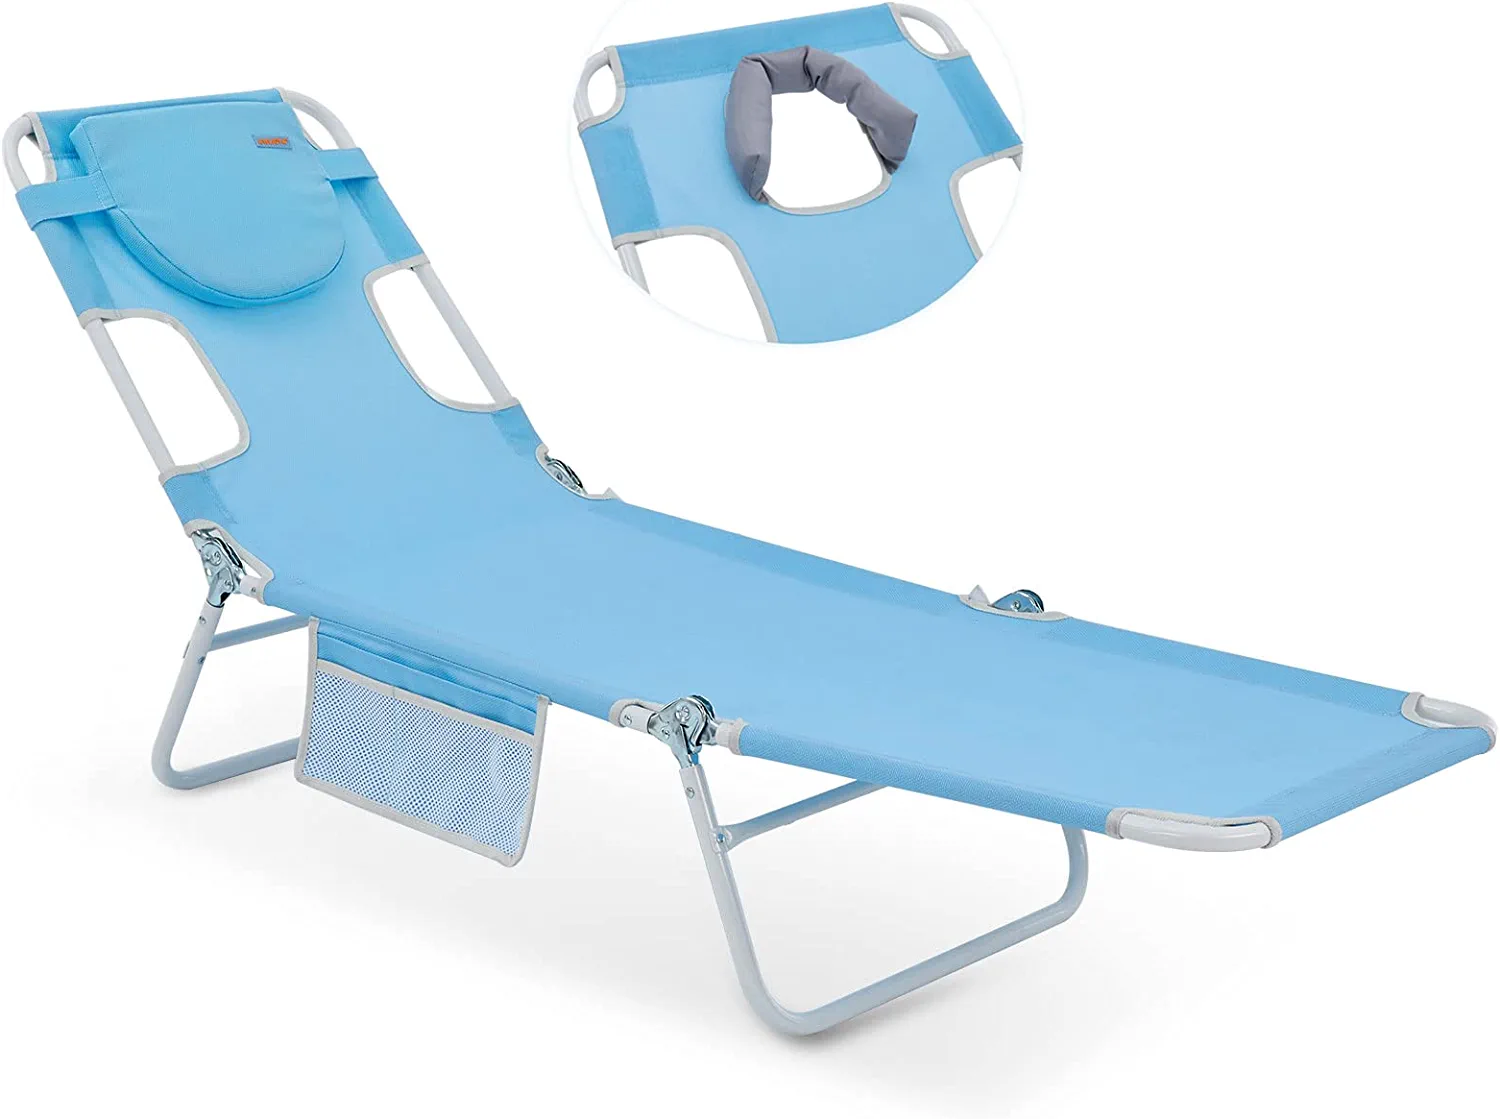 #WEJOY Face Down Tanning Chair, Beach Lounge Chairs, Portable Lightweight Reclining Chair for Adult(Blue) - image 1 of 5